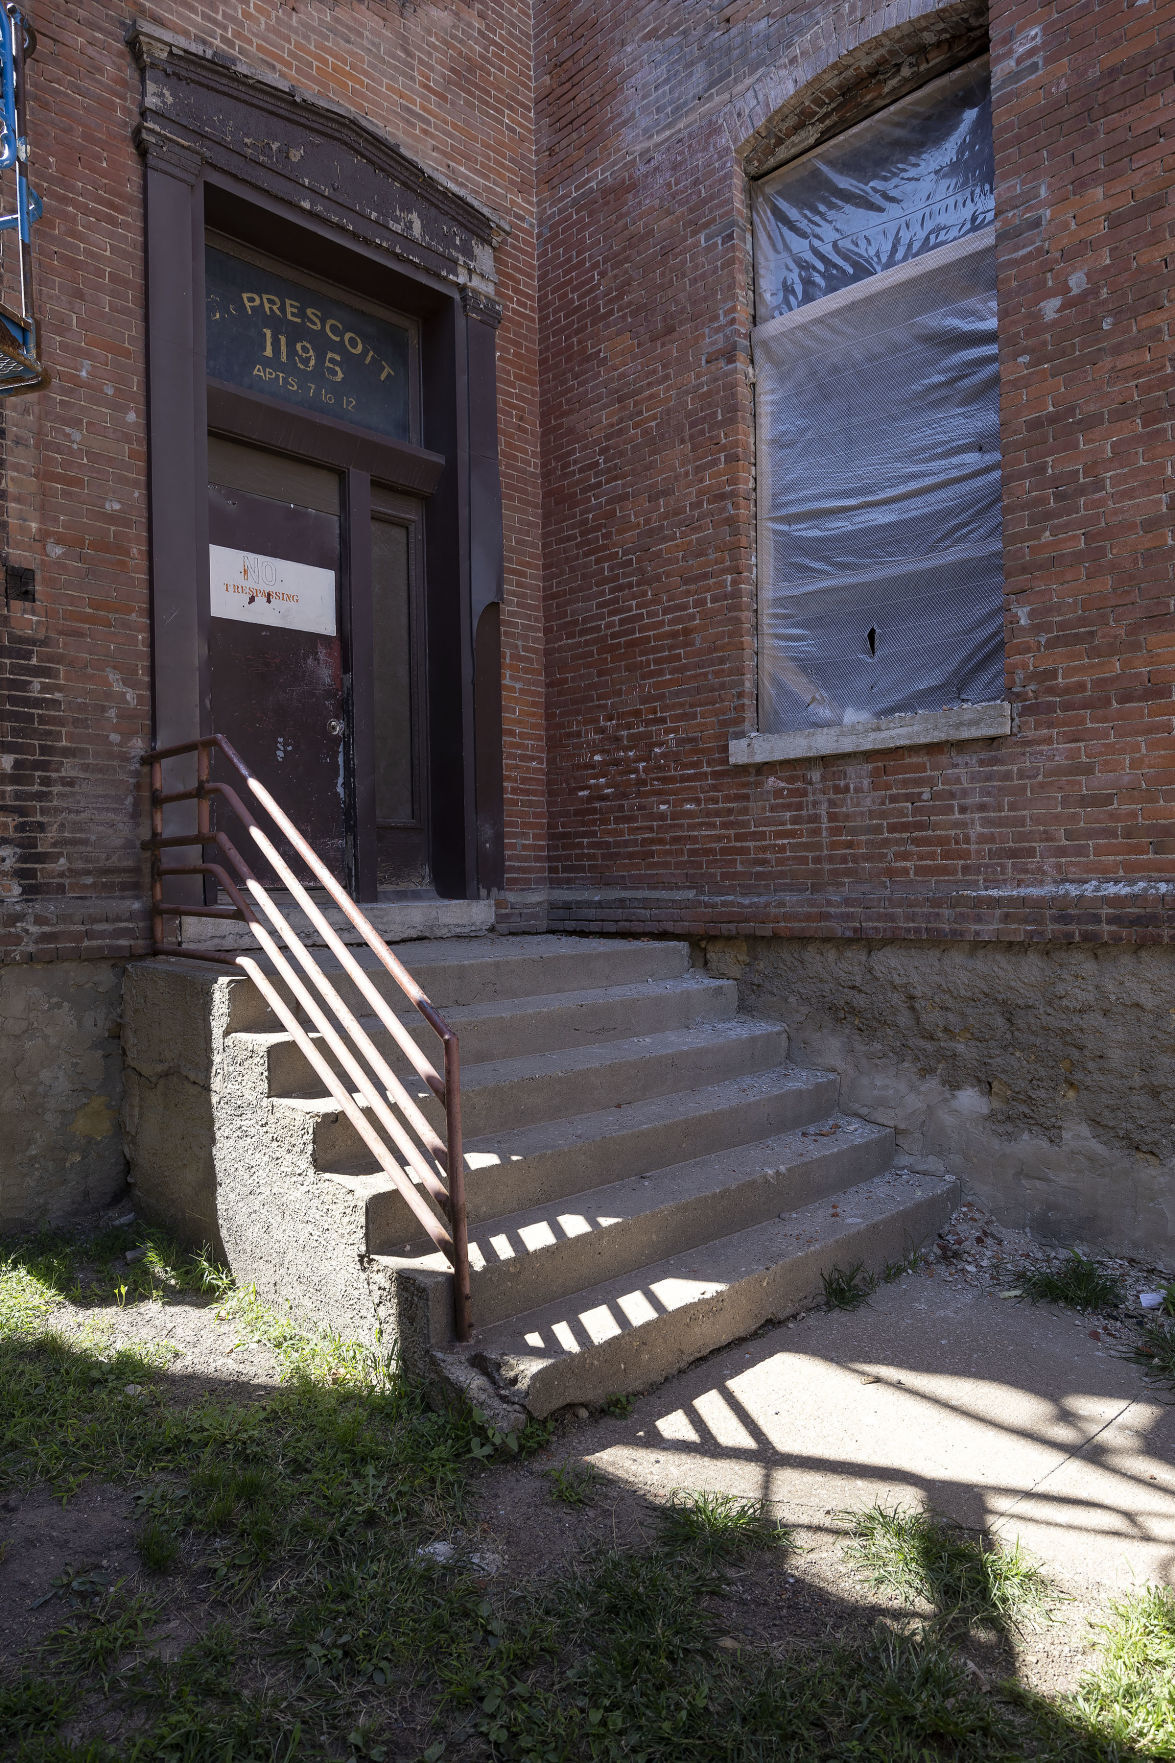 Exterior of the former Prescott school building in Dubuque on Tuesday,, Aug. 30, 2022.    PHOTO CREDIT: Stephen Gassman